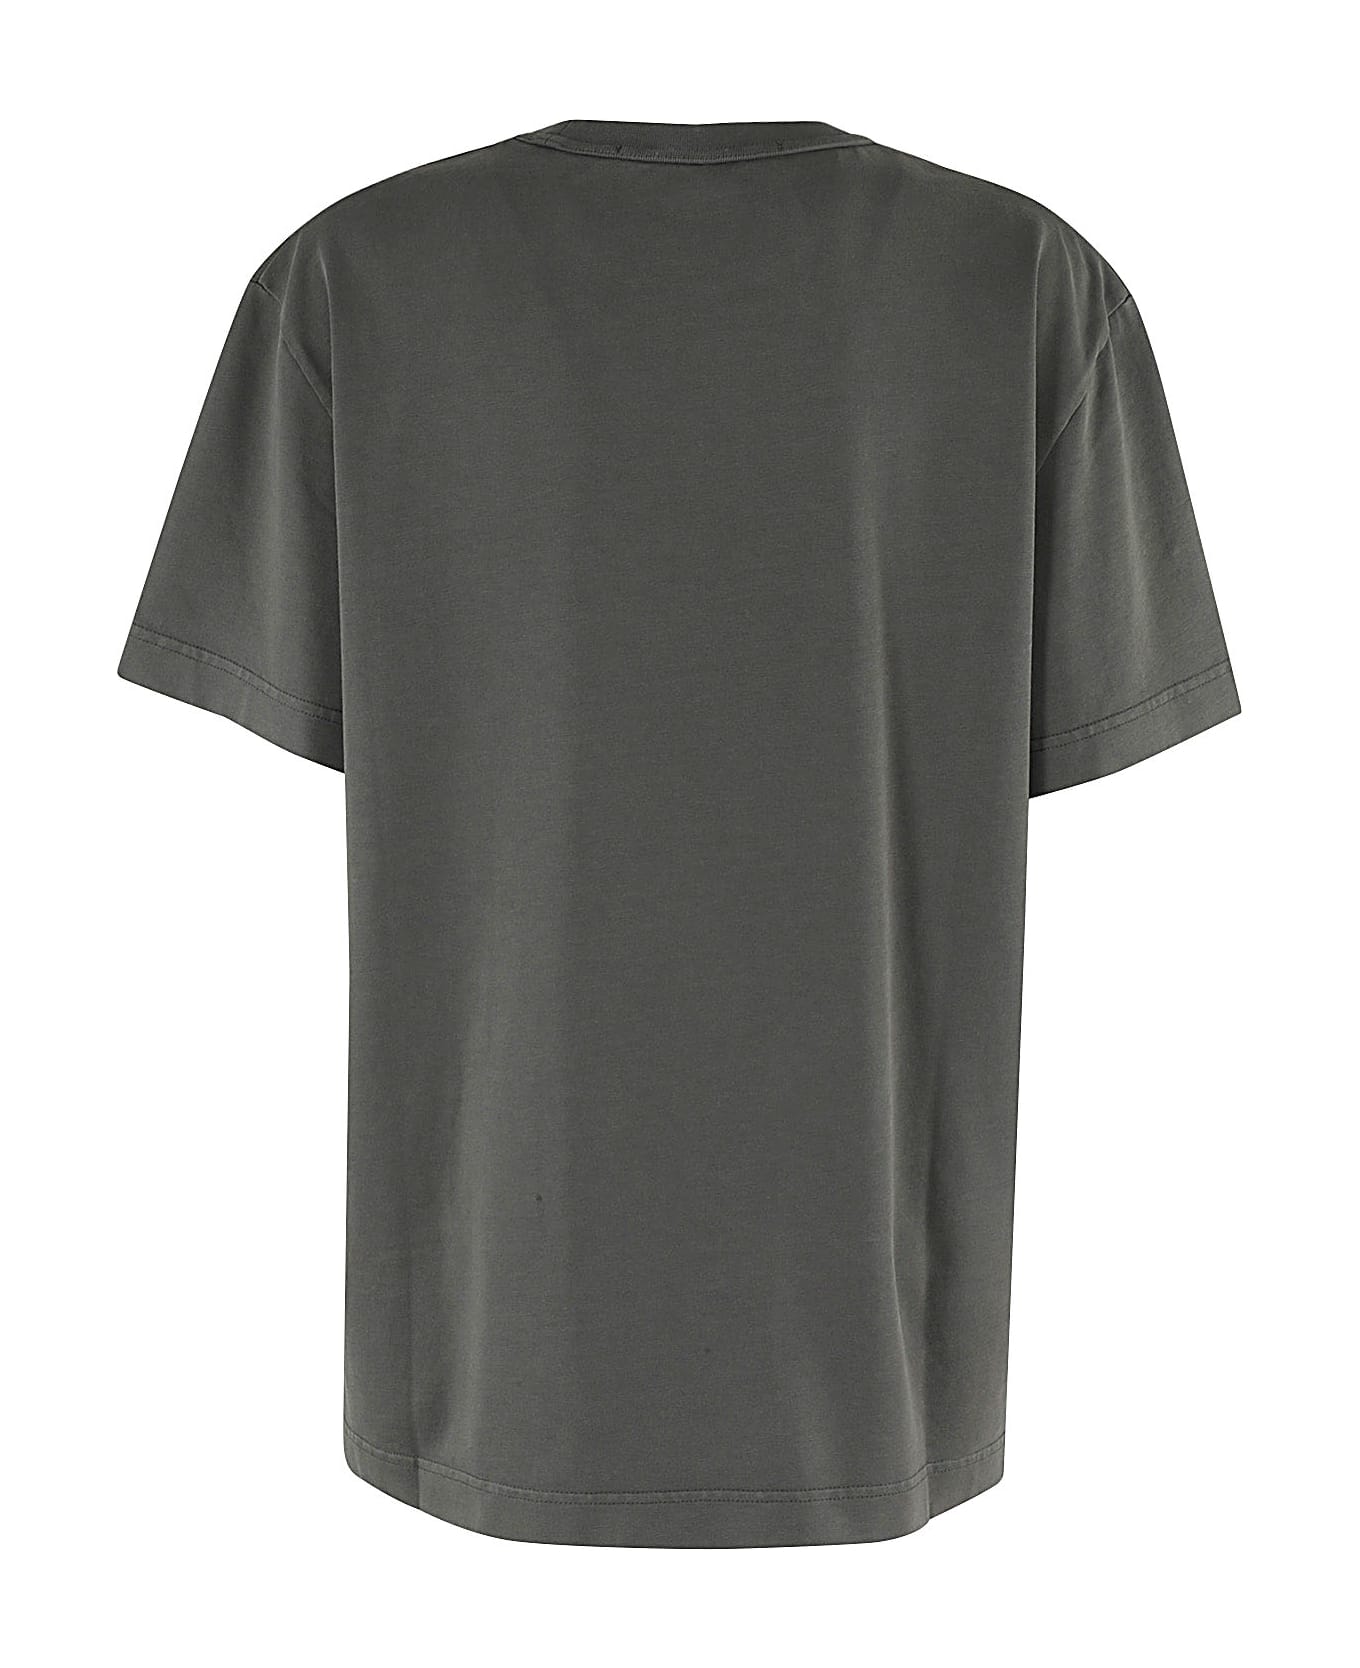 Alexander Wang Short Sleeve Tee With Halo Glow Graphic - A